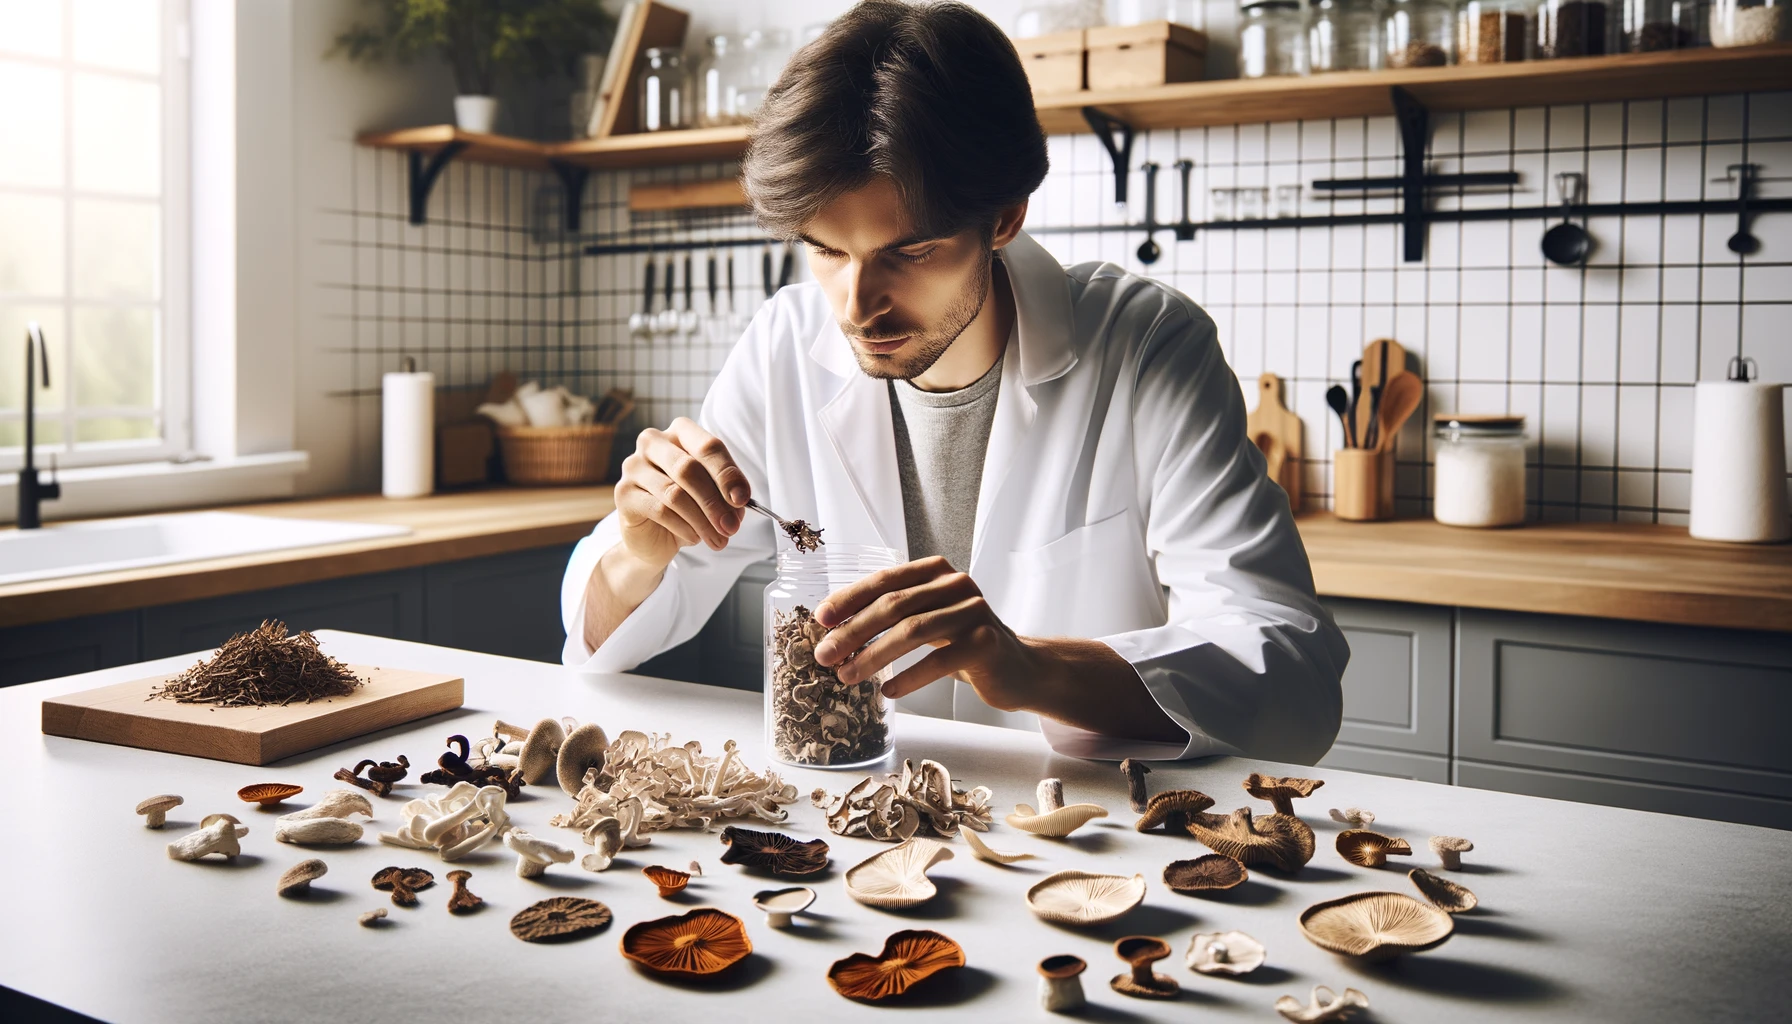 A person collects spores from dried mushrooms on a white surface in a bright kitchen.